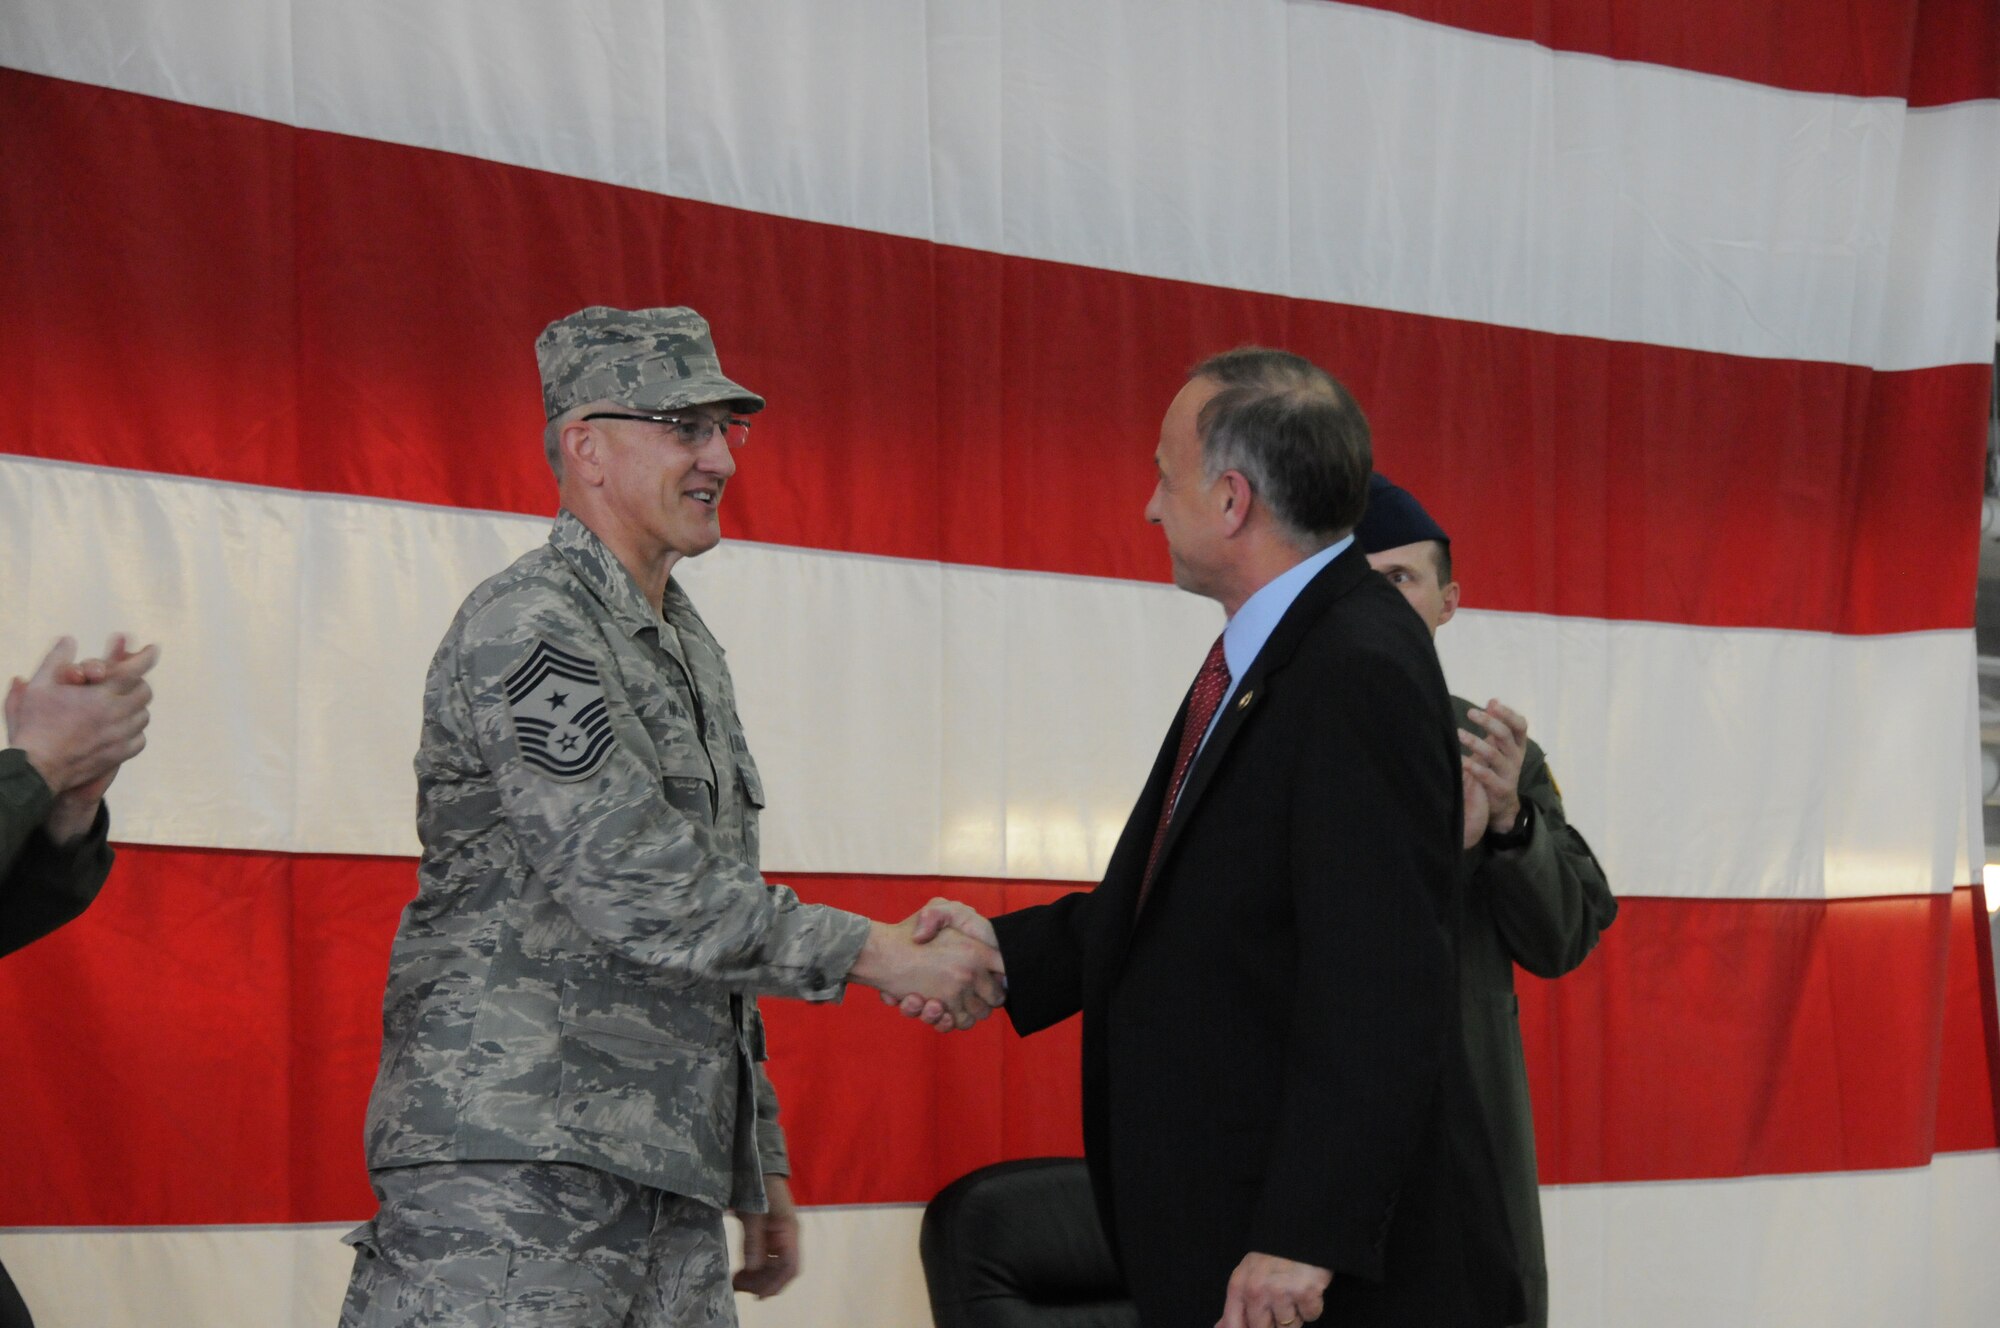 Congressman Steve King (R-IA) congratulates the new Command Chief, Chief Dave Miller at the official change of Command Chief Ceremony on Saturday, April 10, 2010.  
Air Force Photo by: Tech Sgt Oscar Sanchez
